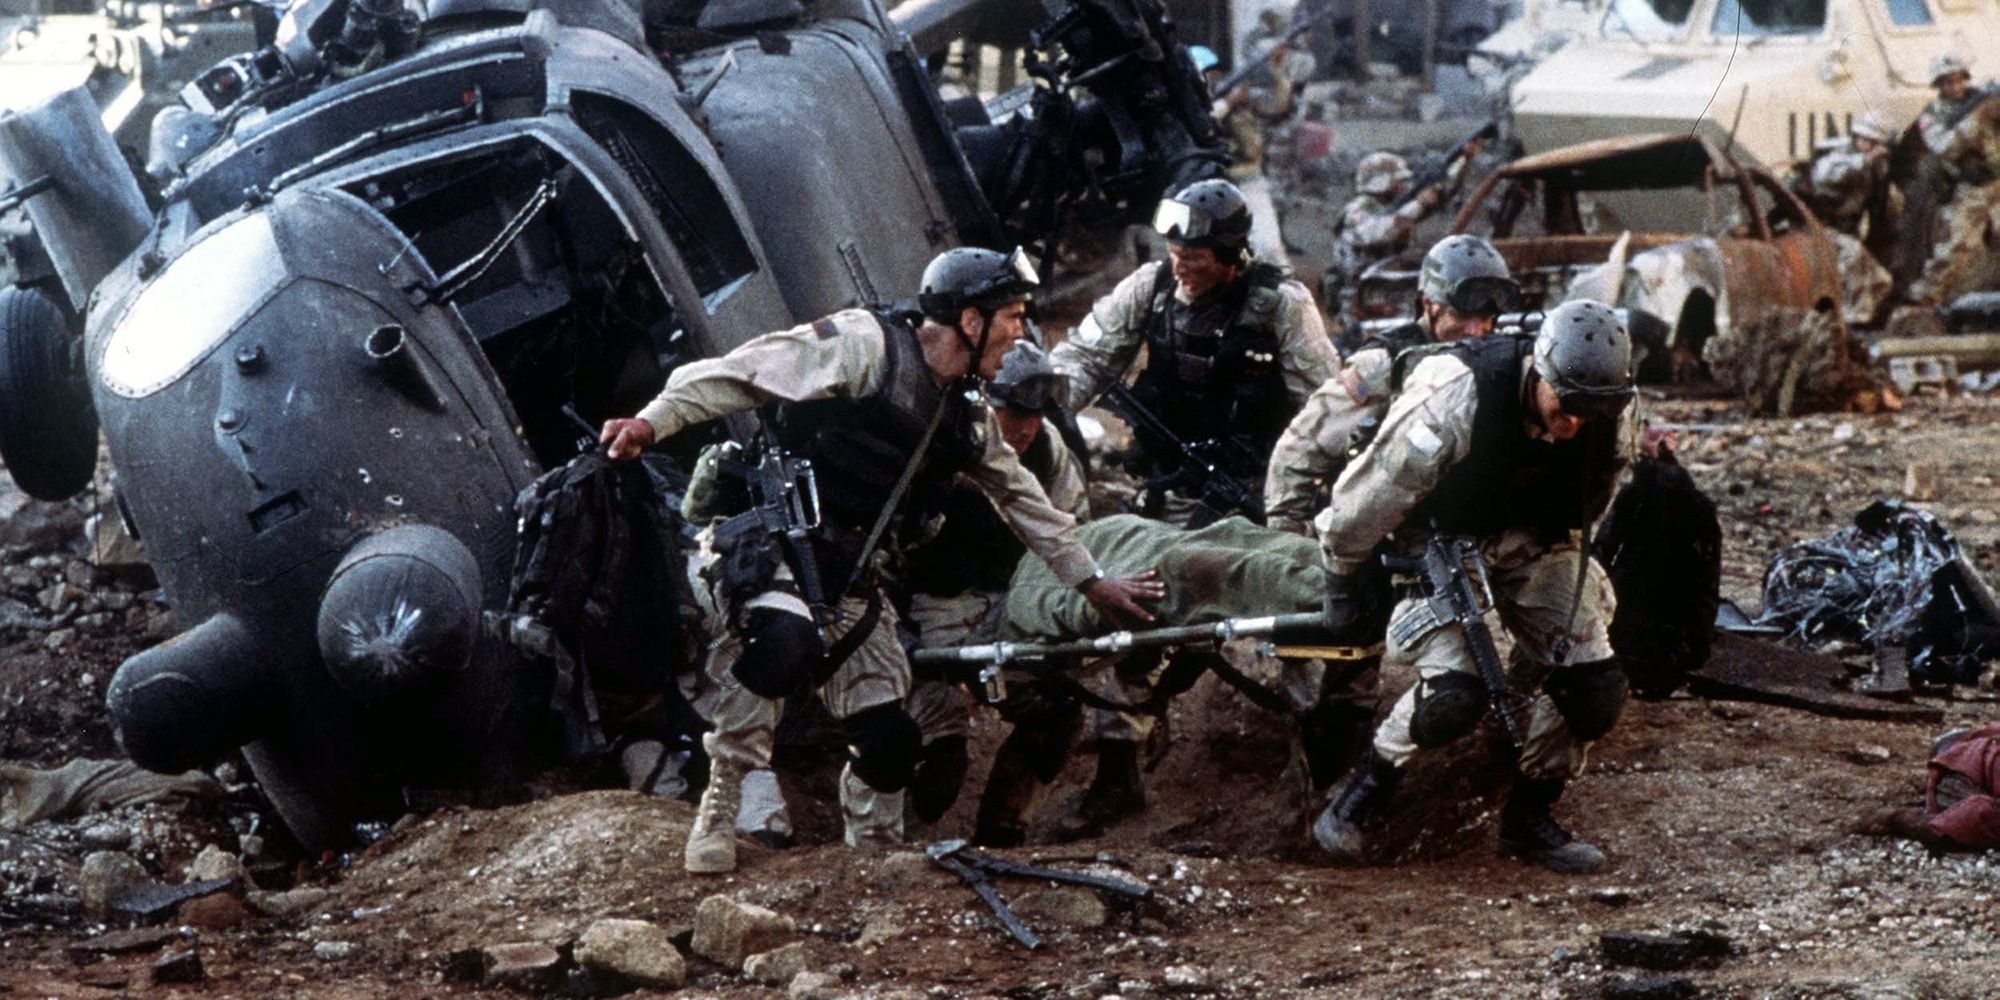 Black Hawk Down takes some liberties with history but its portrayal of modern war is accurate